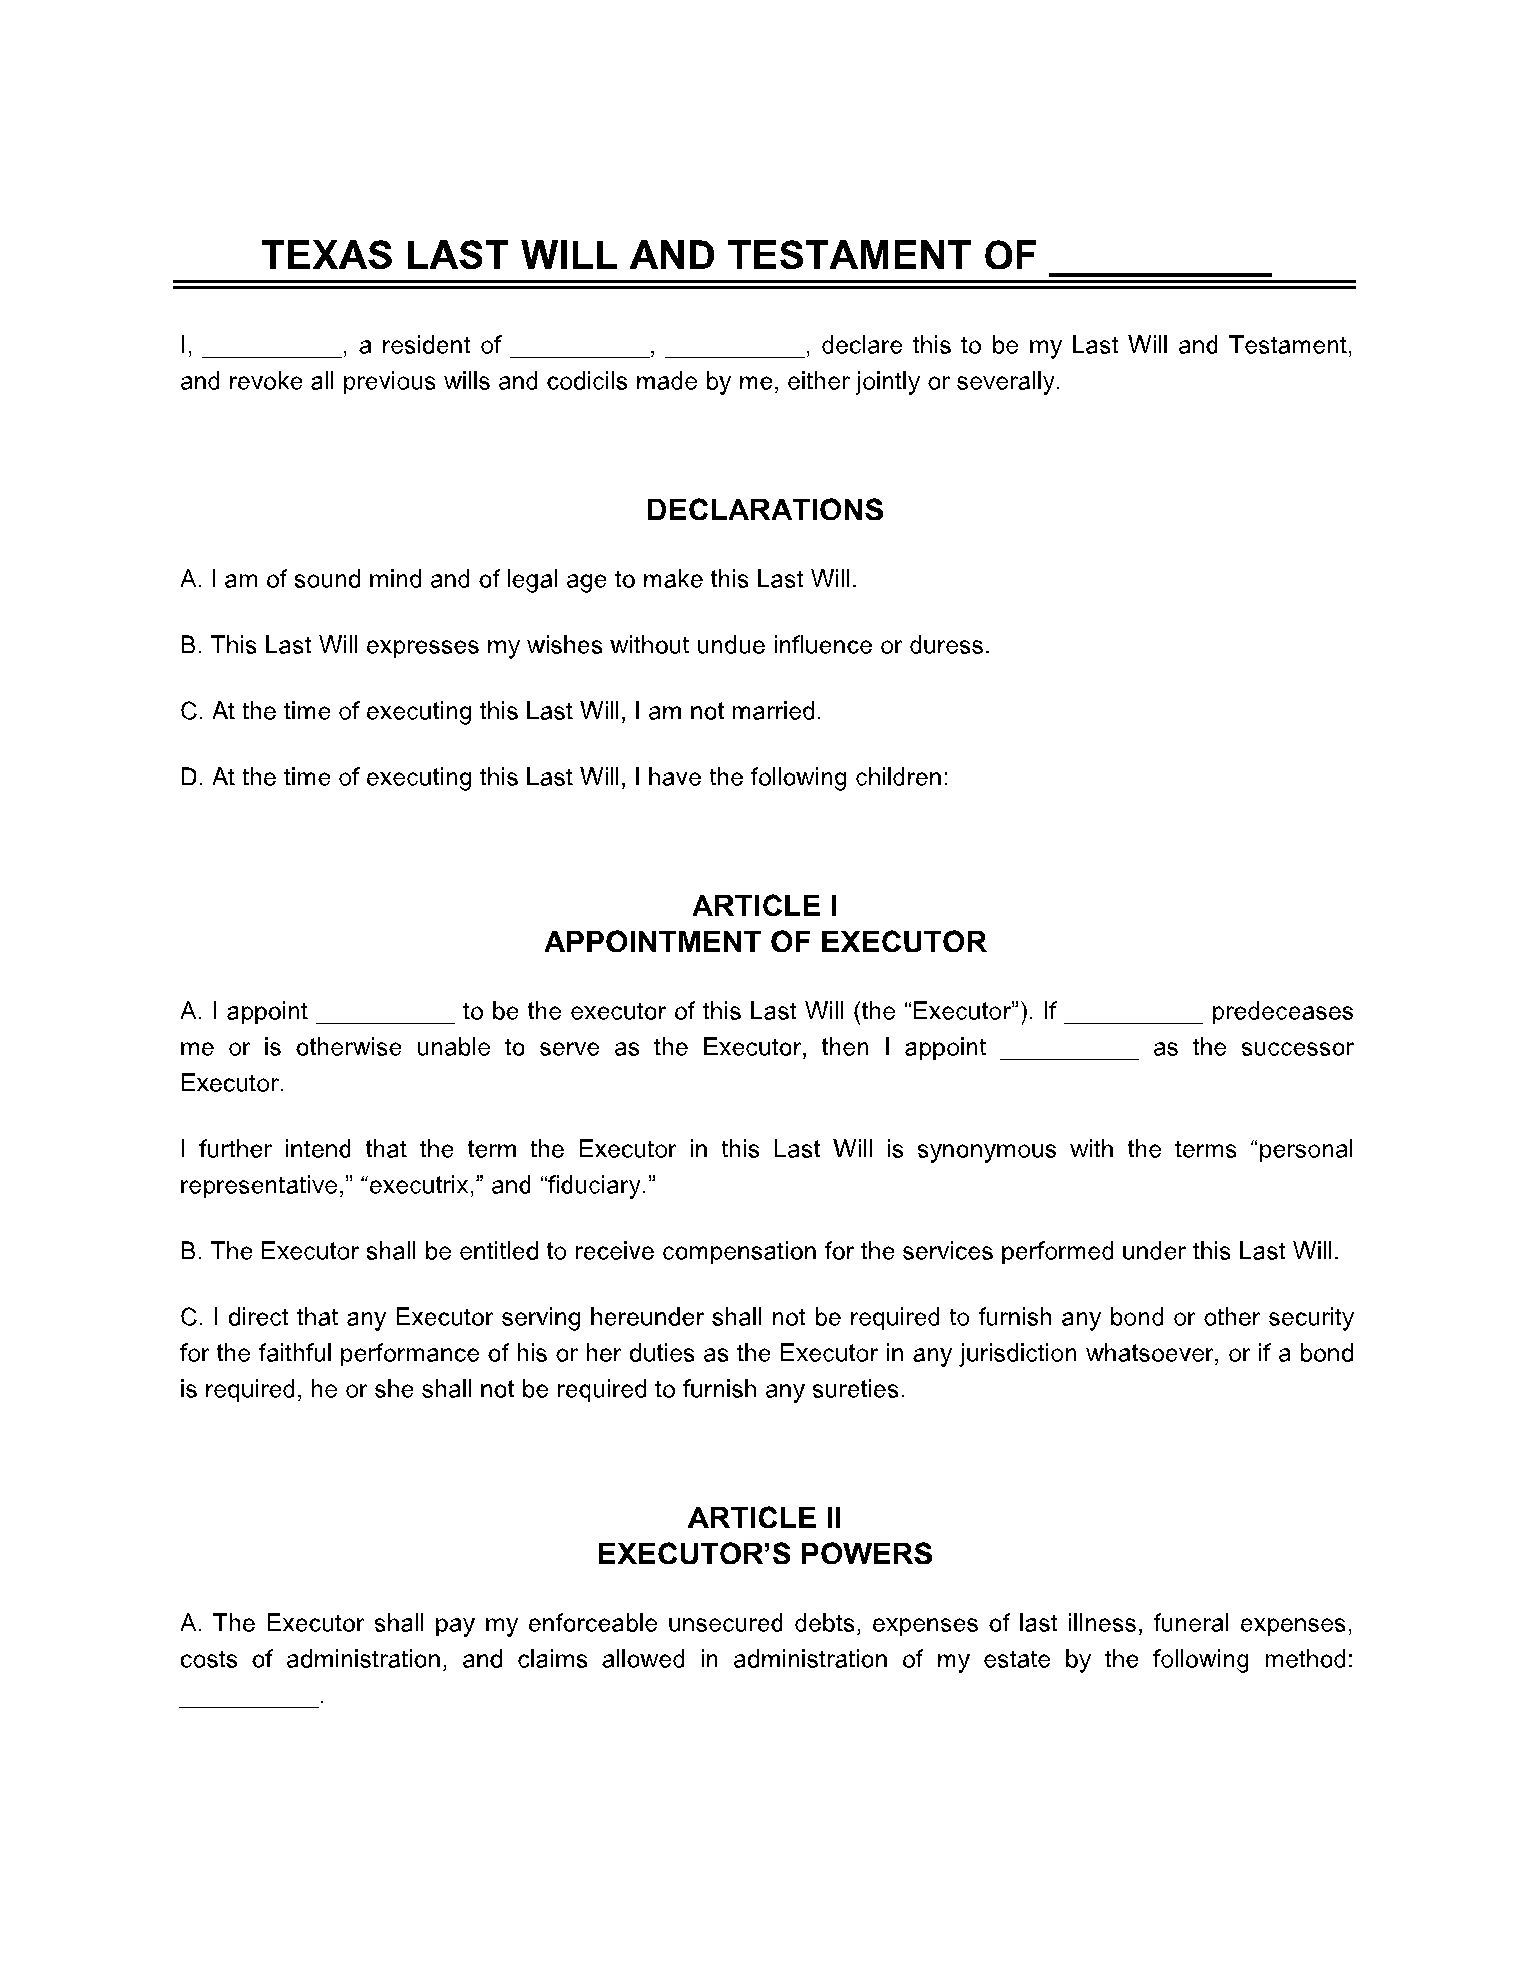 Last Will and Testament Texas